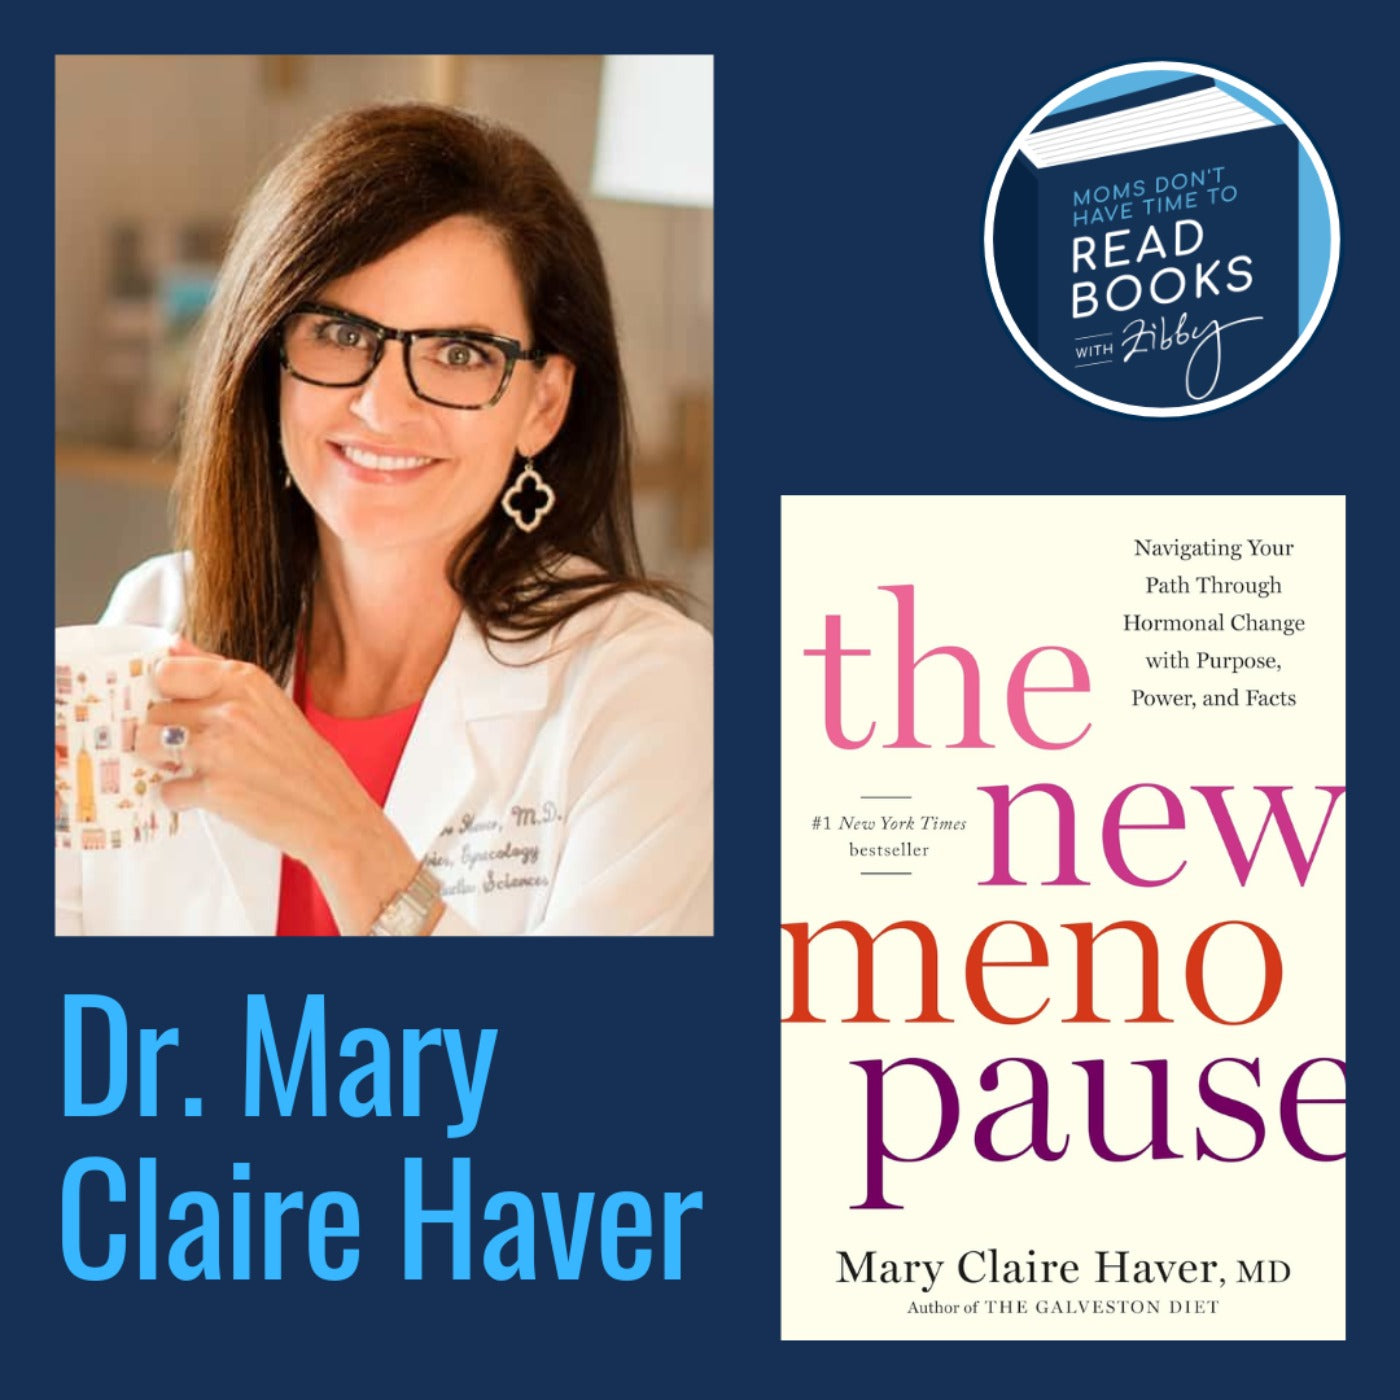 Dr. Mary Claire Haver, THE NEW MENOPAUSE